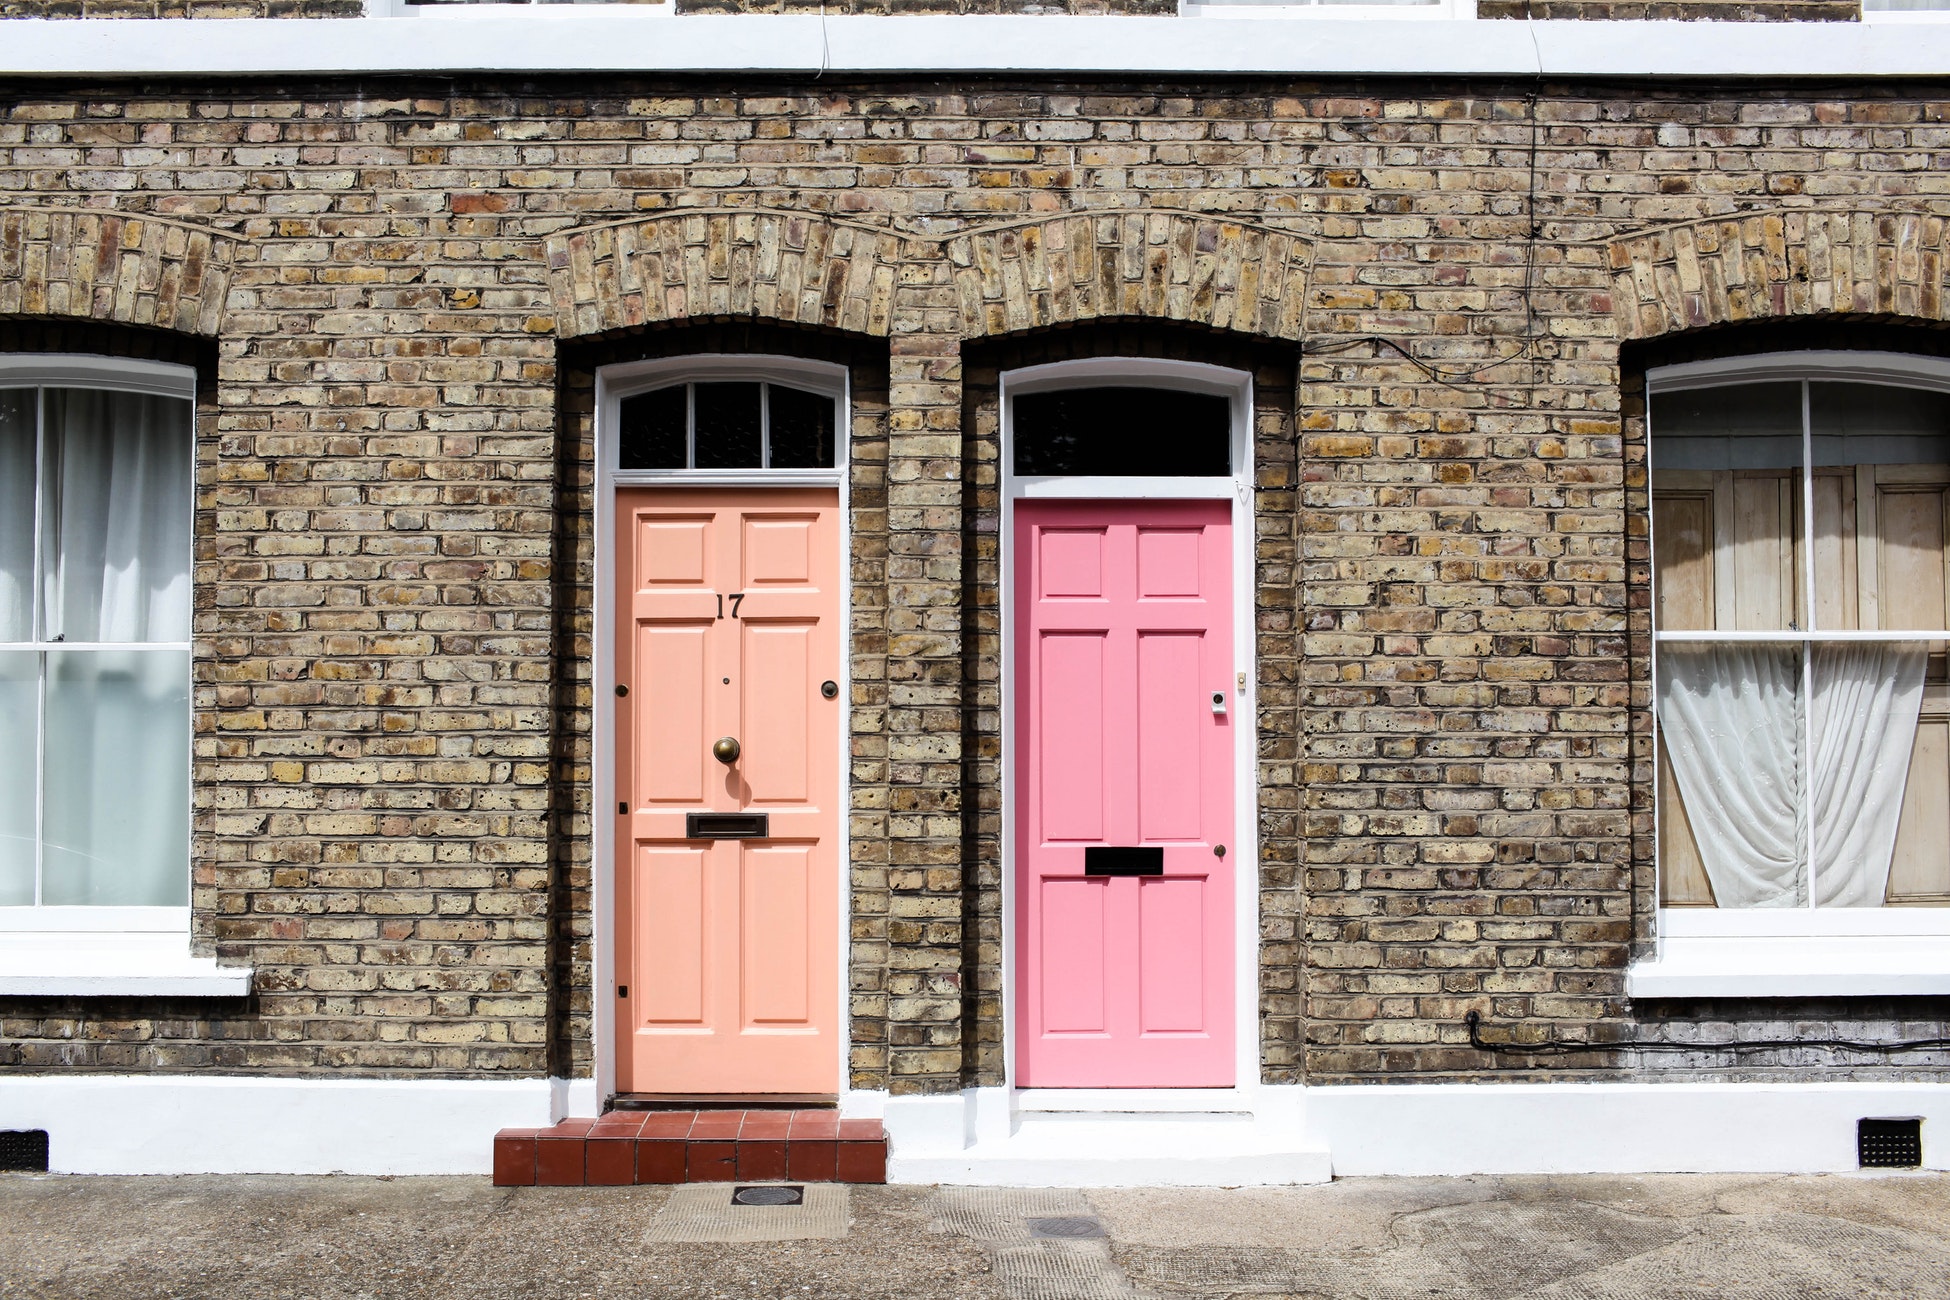 Two doors, orange and pink, in the daylight